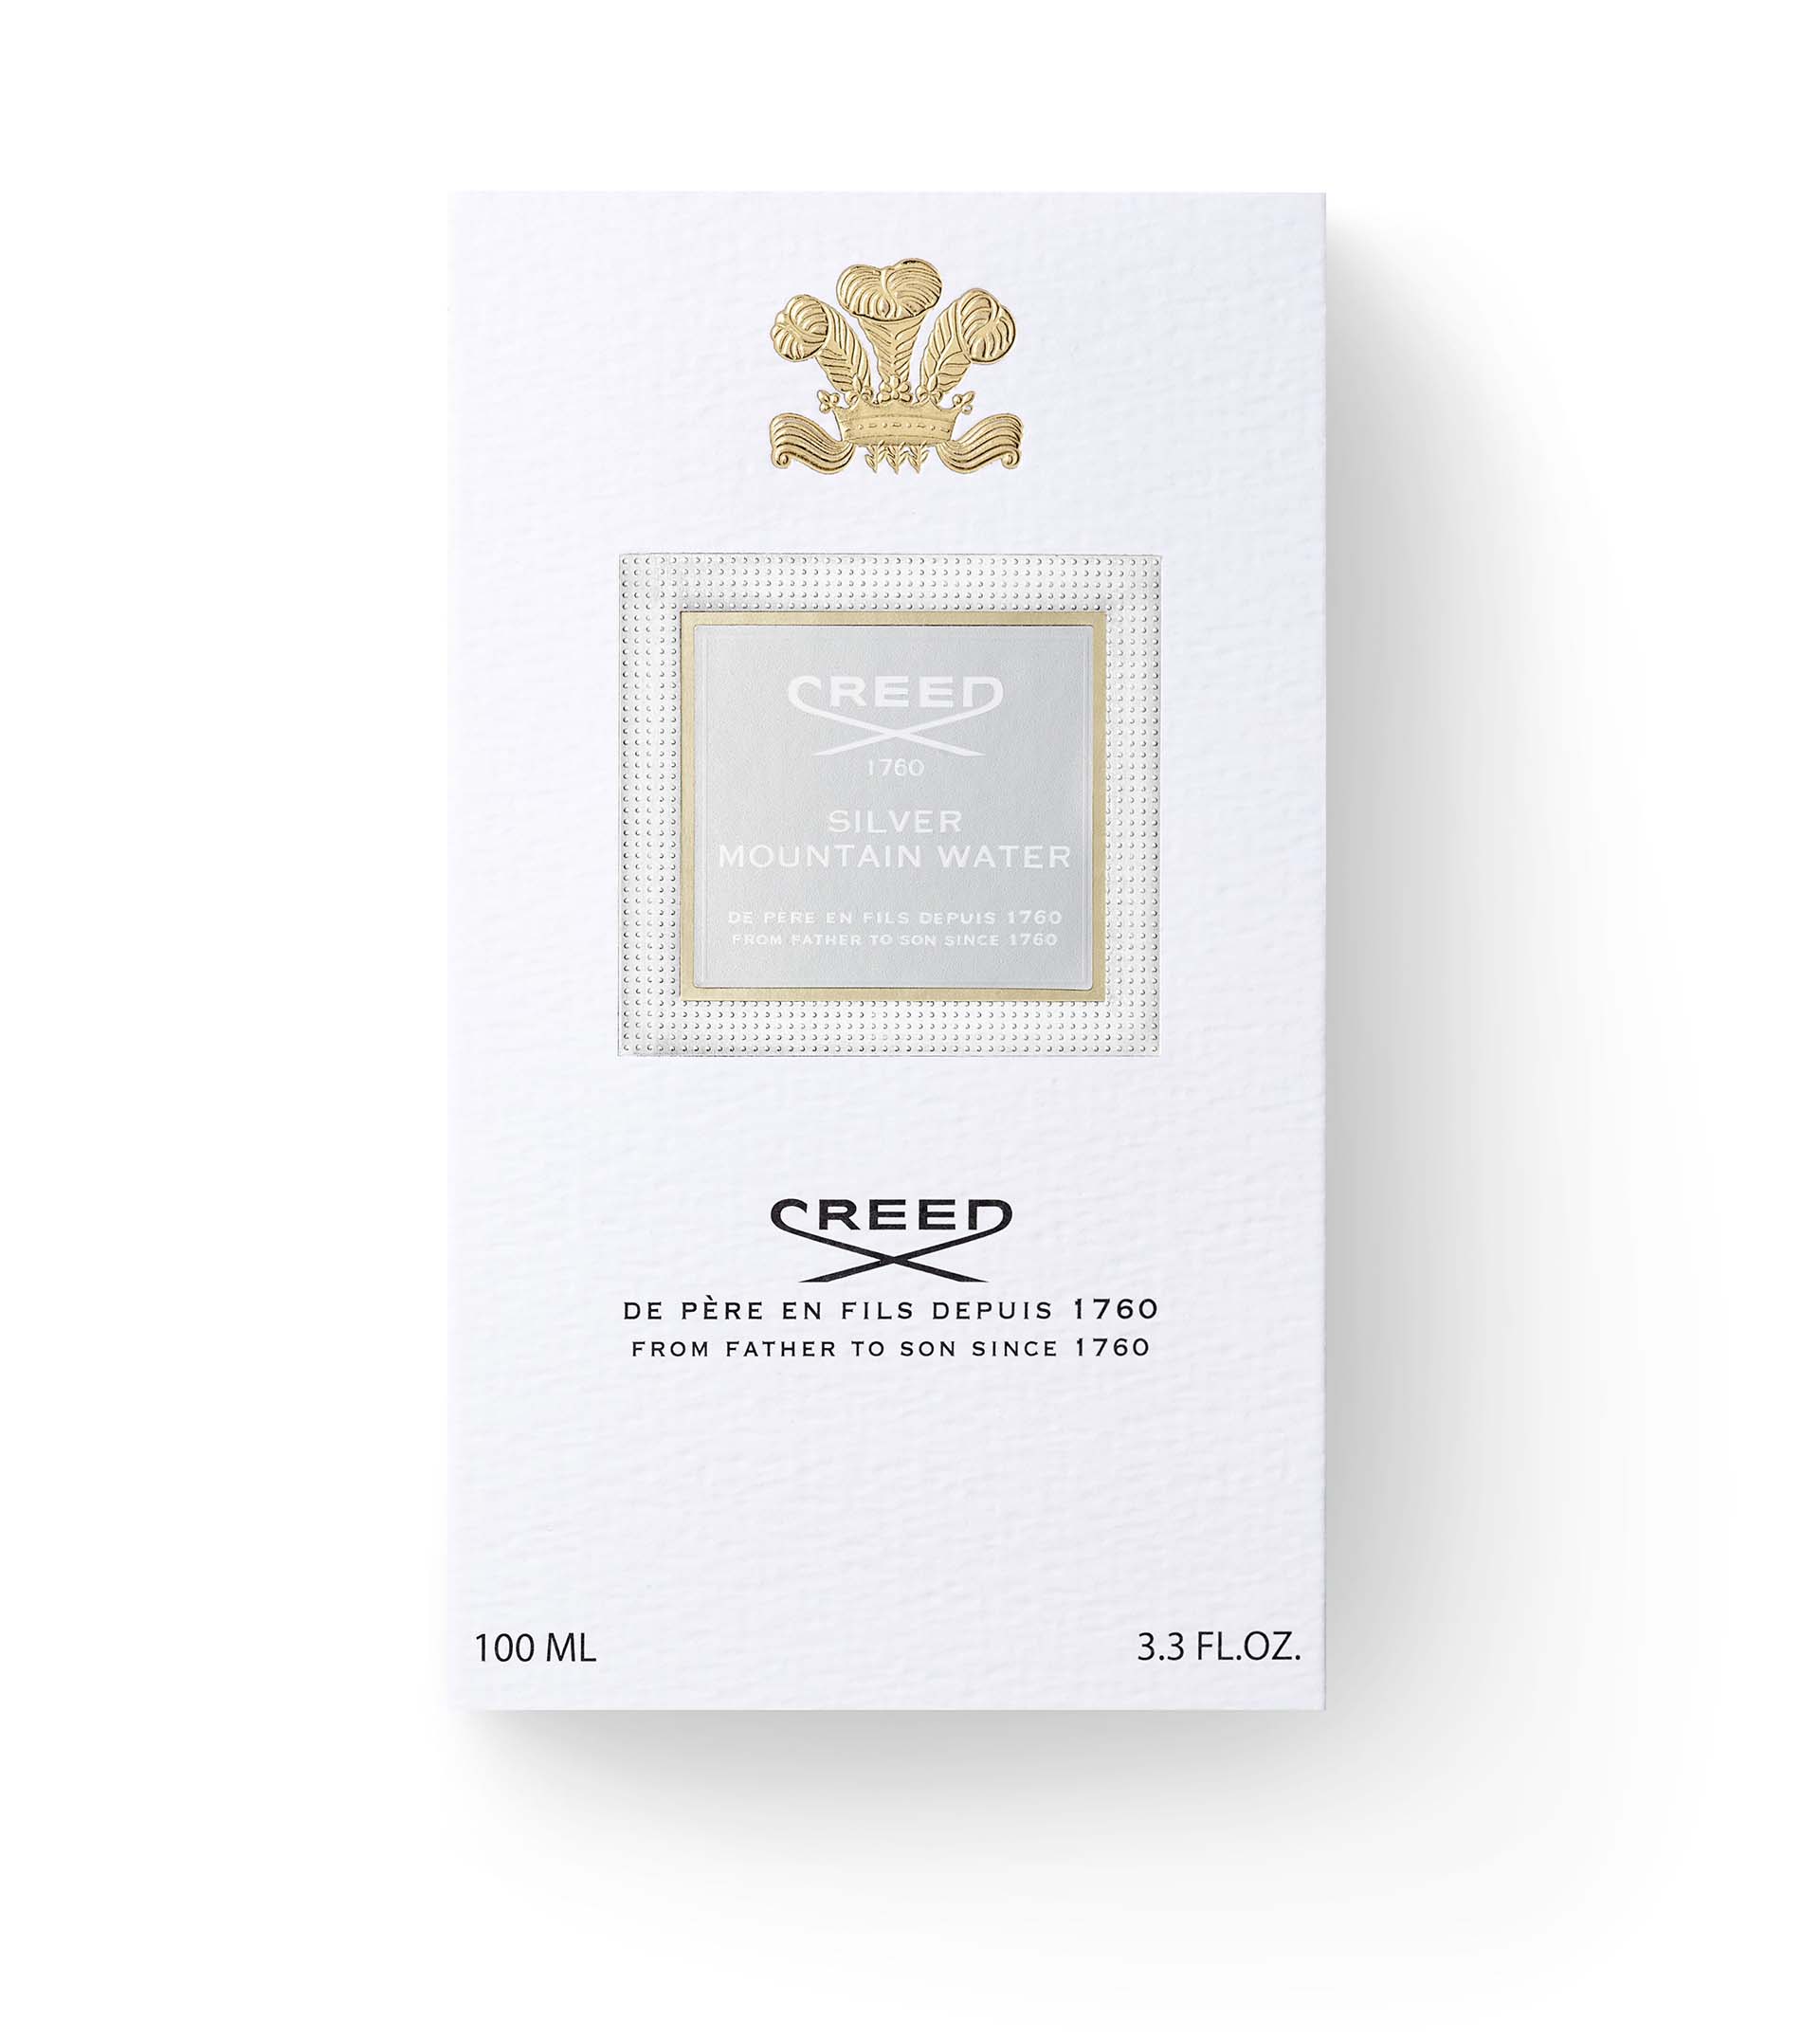 CREED Silver Mountain Water Cologne 100ml